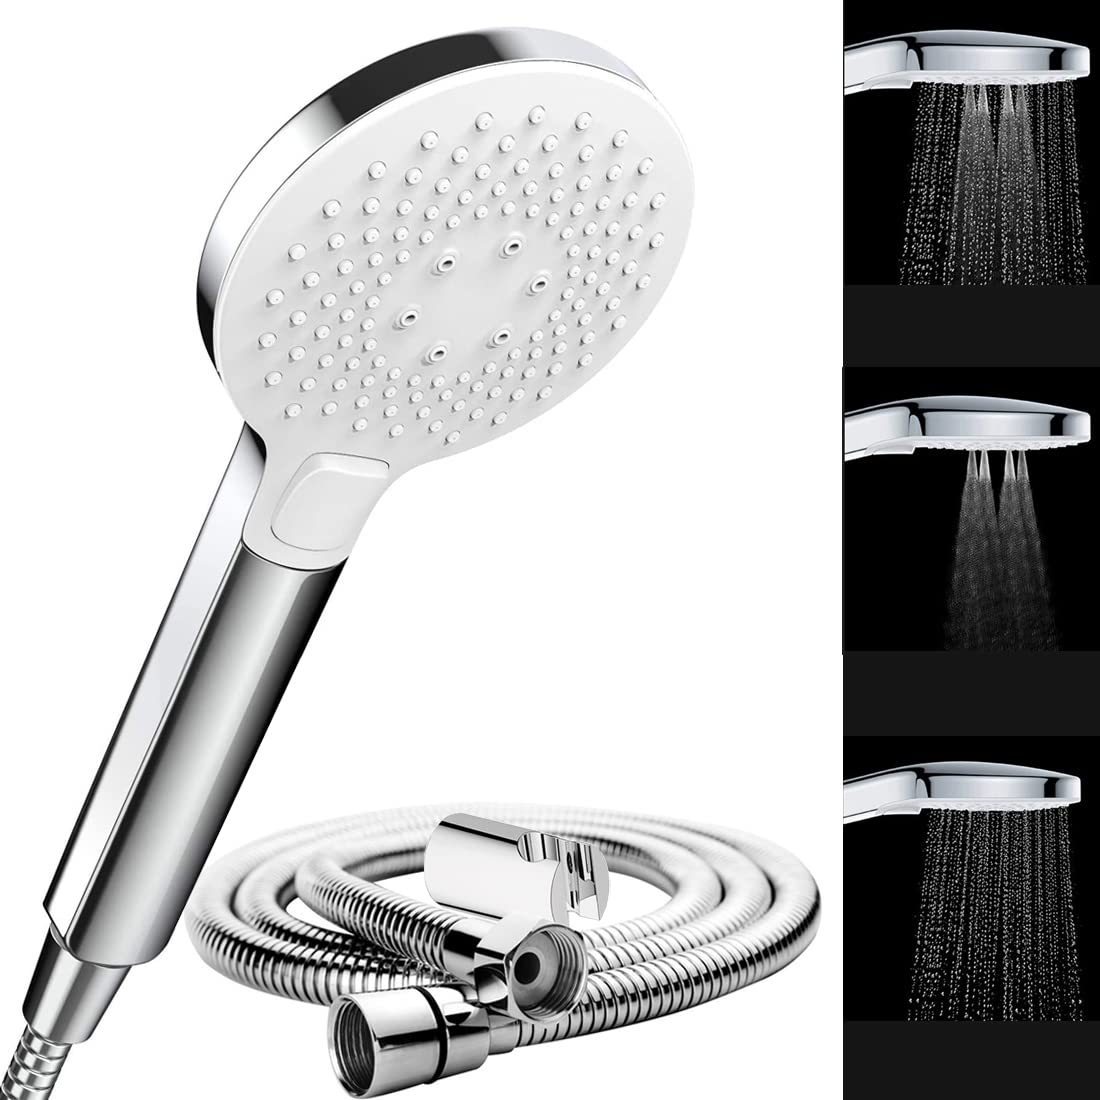 Quakin ABS 3-Function Chrome Finish Polished Hand Shower with 1.5 Meter Flexible Tube and Wall Hook (Silver)